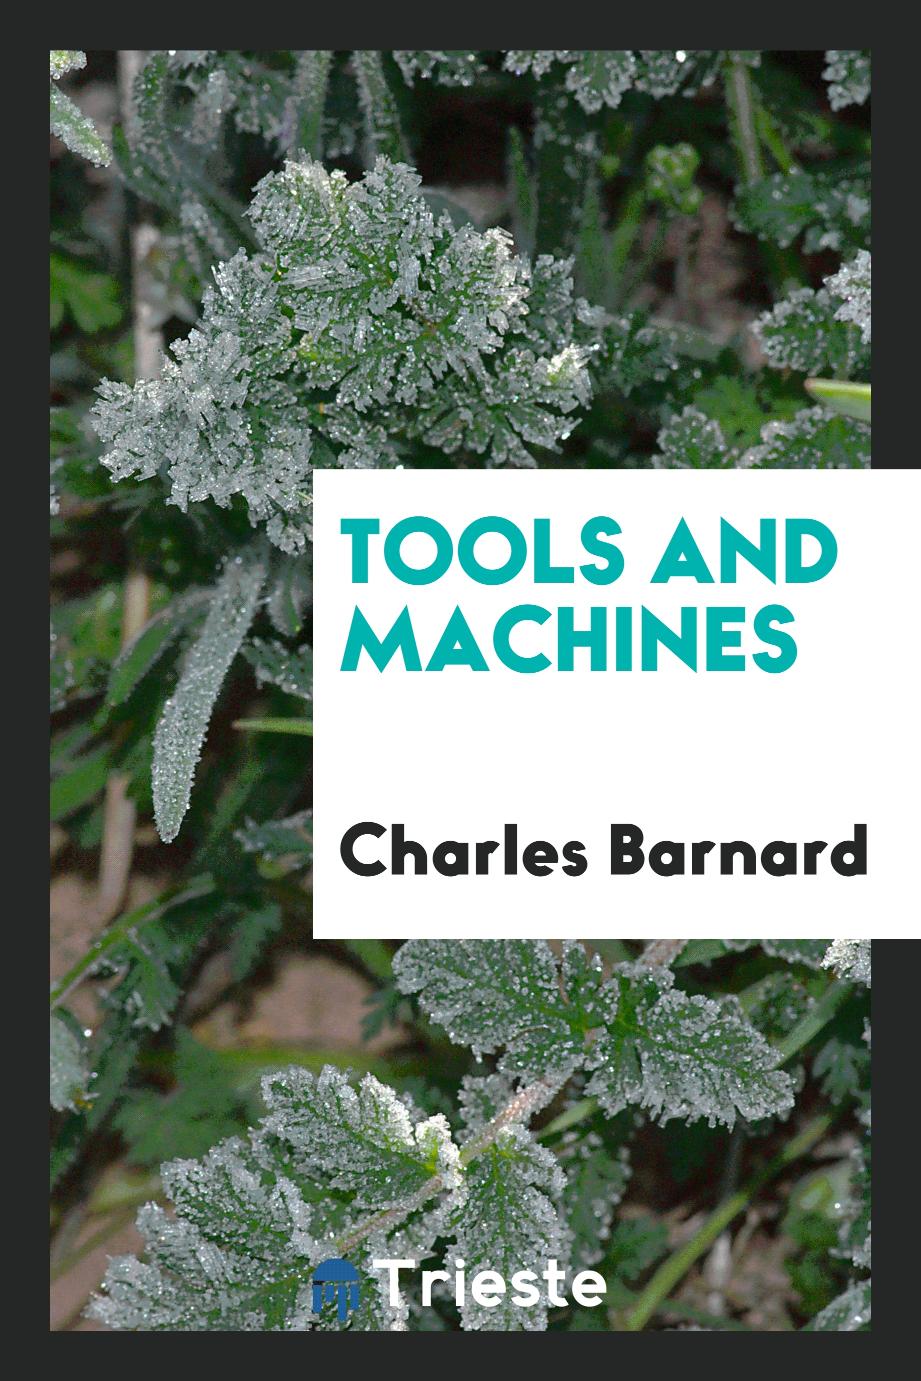 Tools and Machines